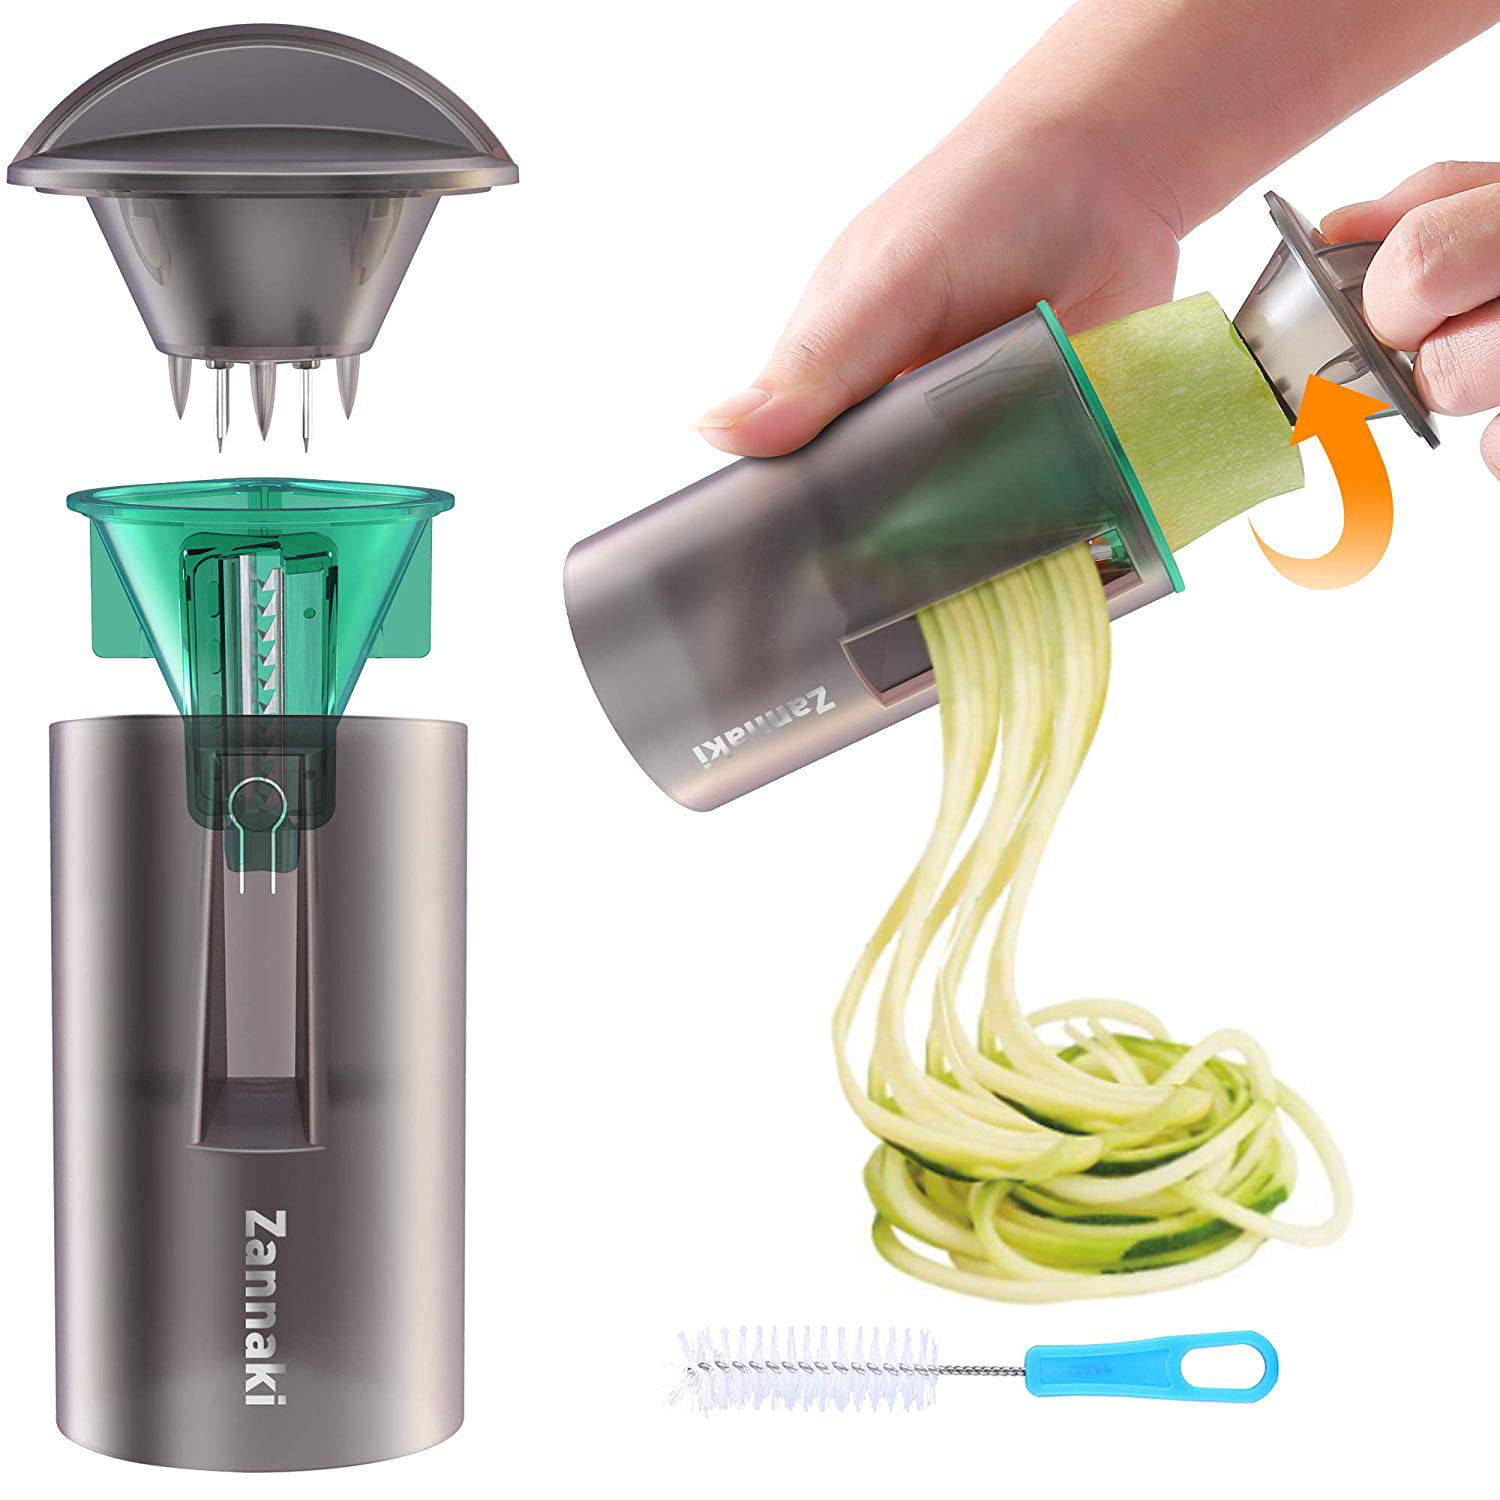 Spiral Slicer Vegetable Slicer Heavy-Duty Vegetable Spiral Slicer with Powerful Suction Cup Zucchini Spiral Noodles/Western Noodles/Spaghetti/Maker 